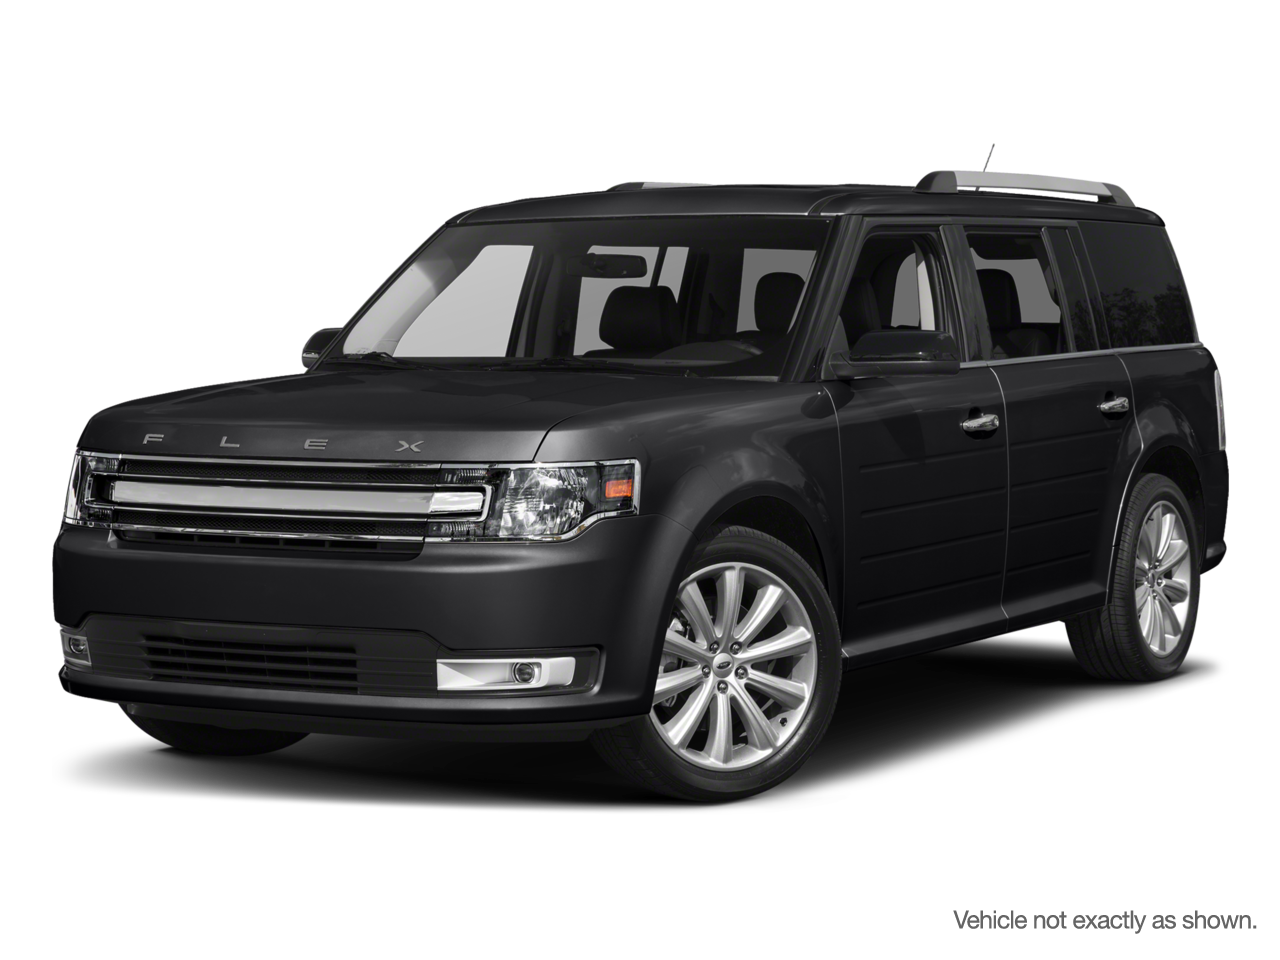 2017 Ford Flex Limited - AWD Low Mileage | Great Value